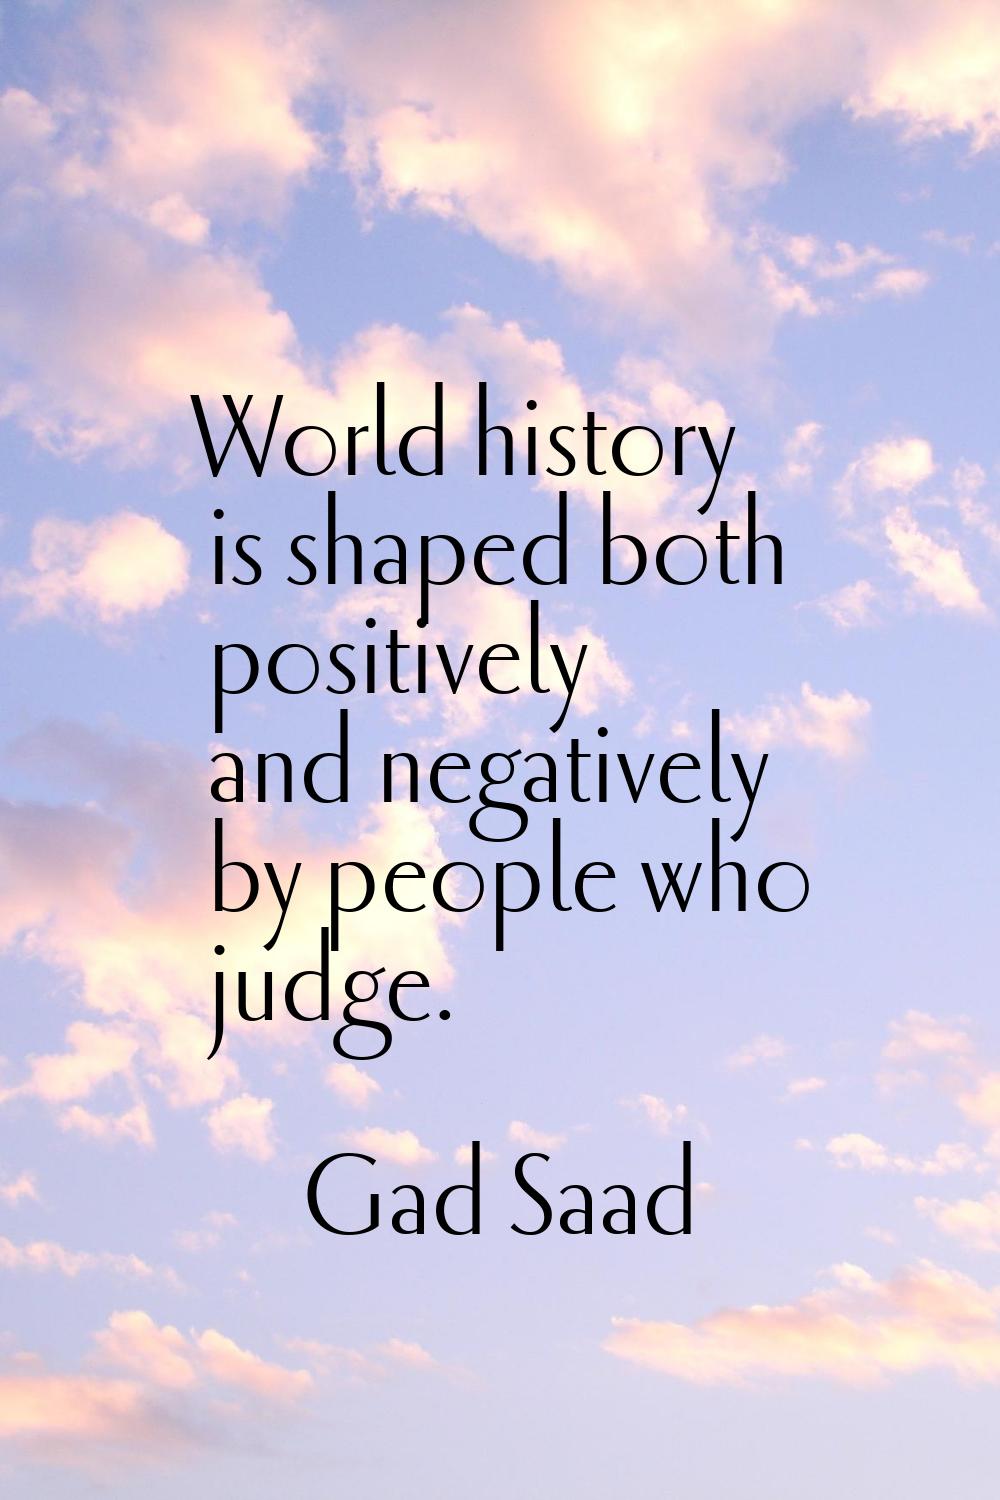 World history is shaped both positively and negatively by people who judge.